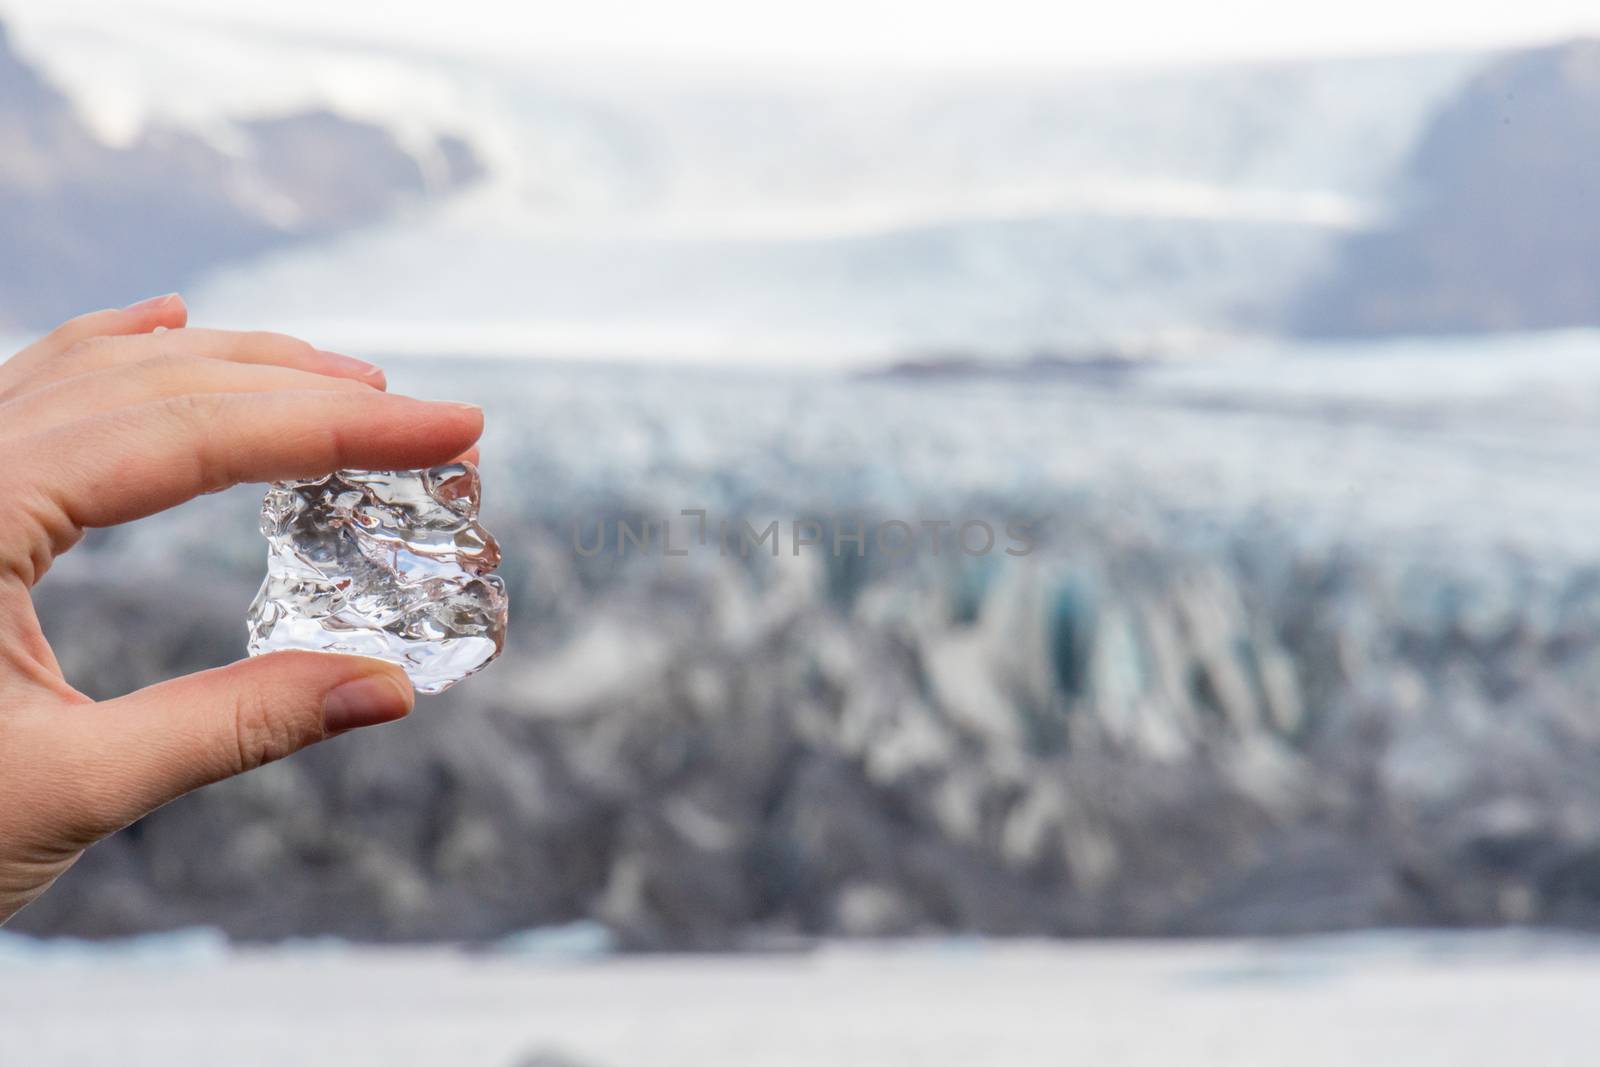 Vatnajoekull glacier in Iceland ice of the glacier between fingers in front of the deep blue ice crevice